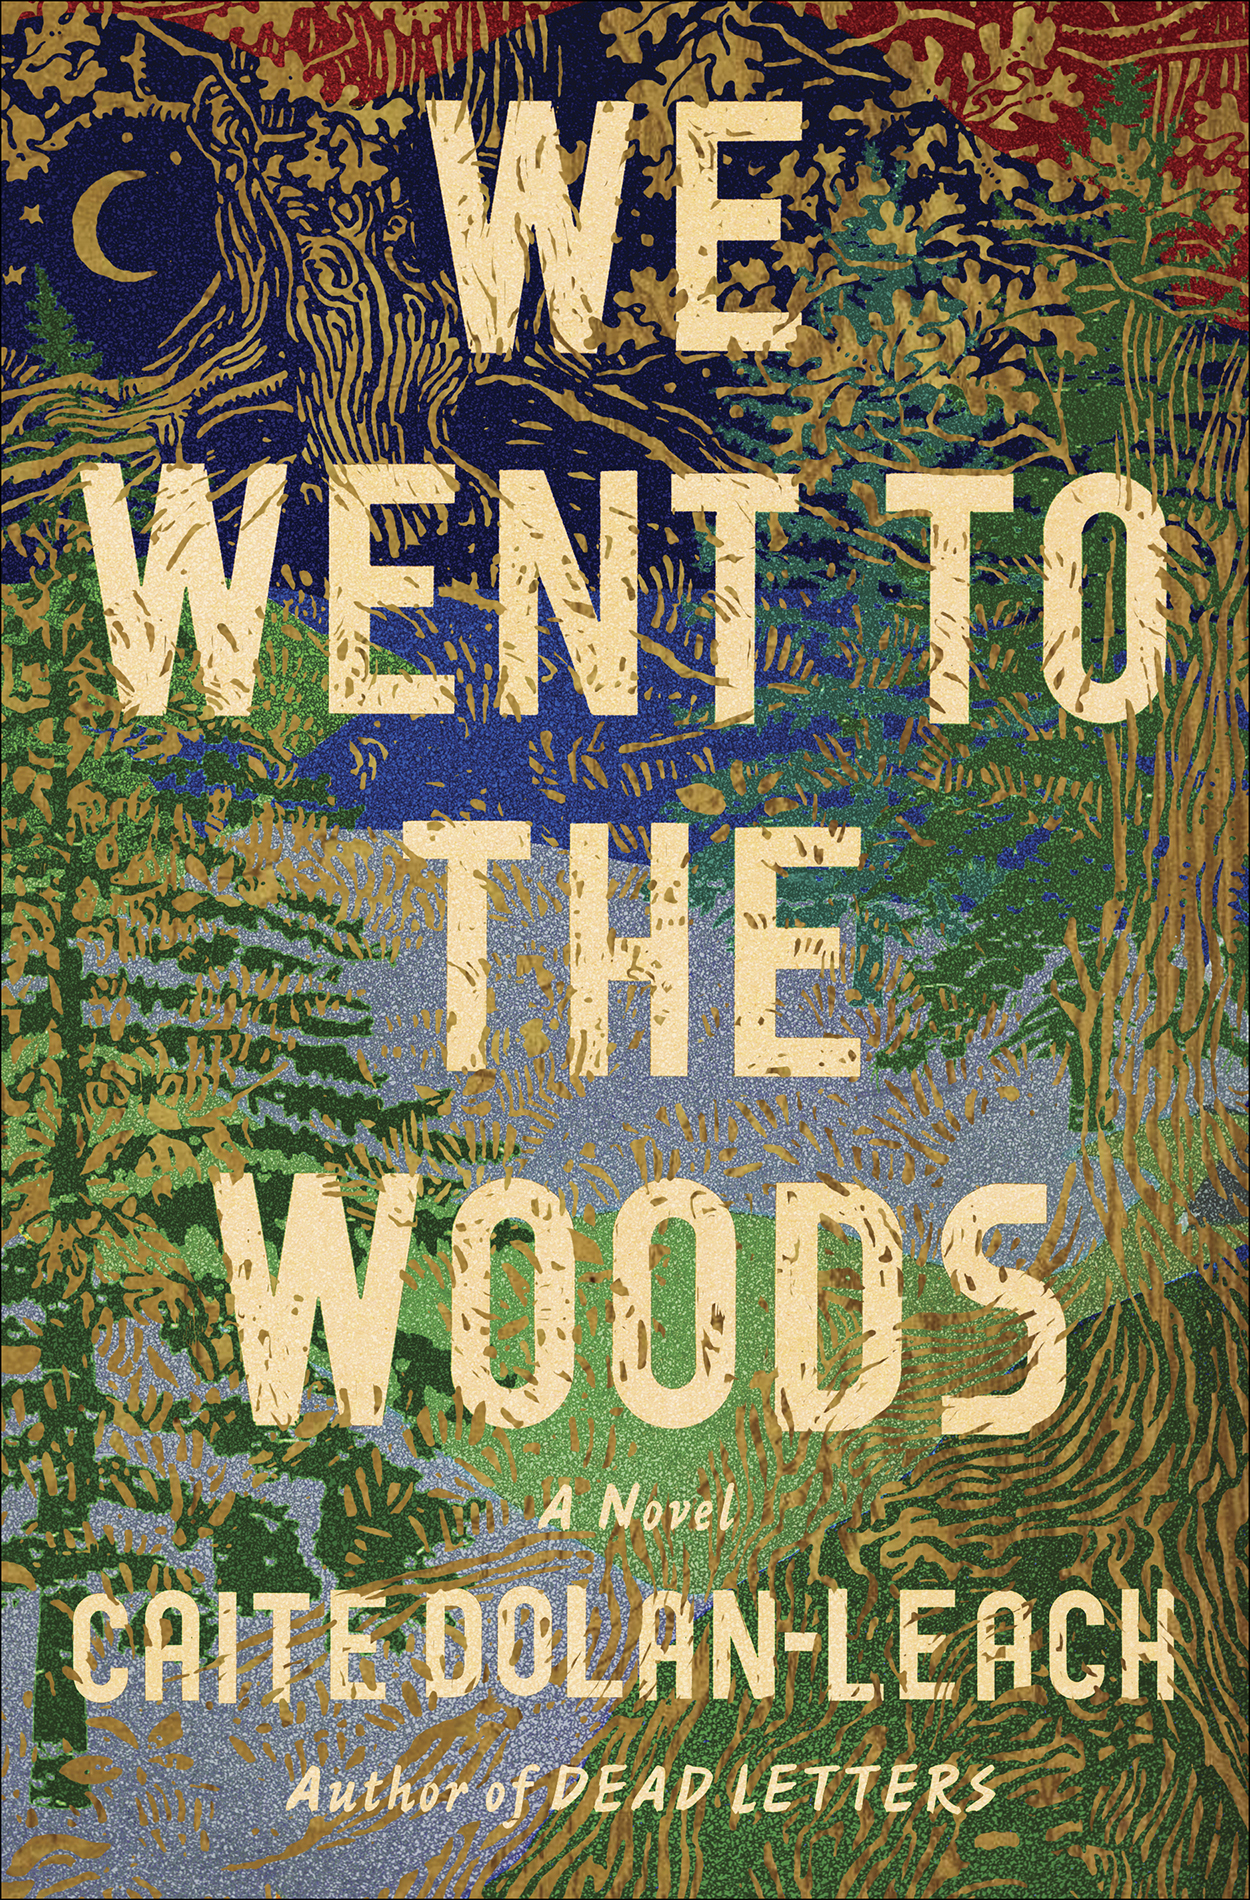 We Went to the Woods by Caite Dolan-Leach - Curtis Brown